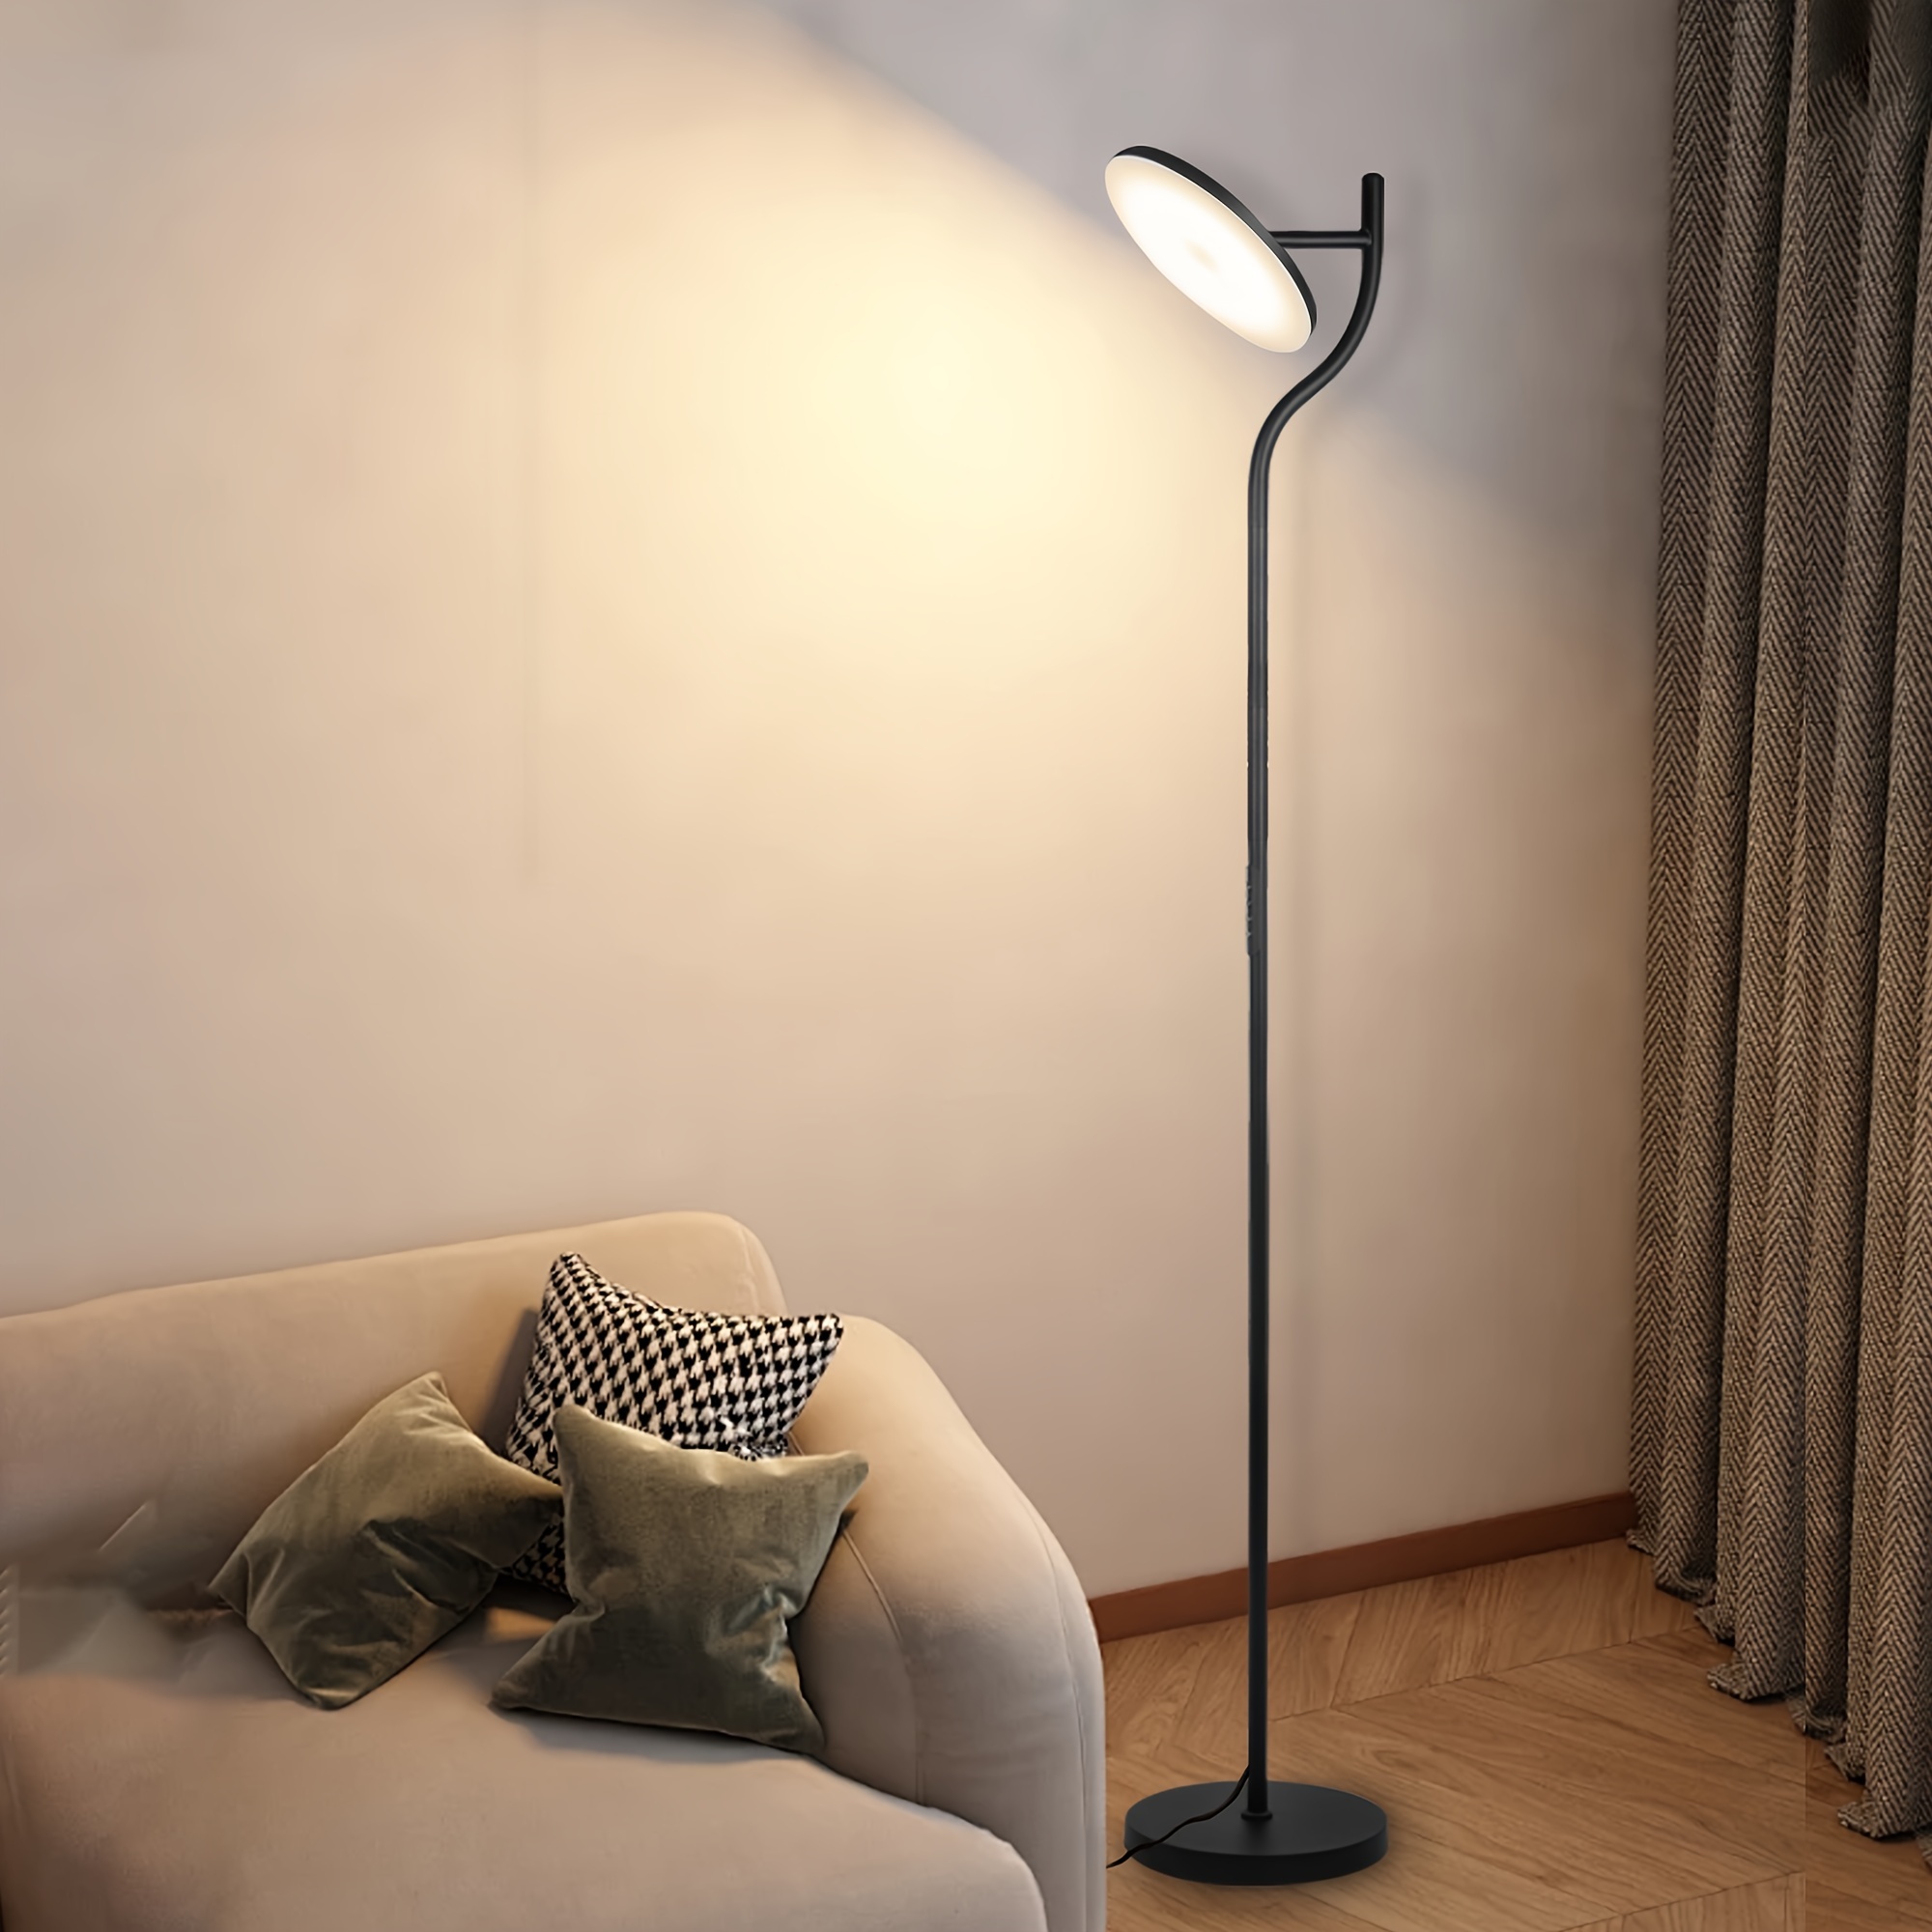 

Led Floor Lamp Dimmable In Living Room -36w Rotating Floor Lamp Black 4-color Continuous Dimming - Floor Lamp With Remote Control And Touch Control In Living Room, Bedroom, Office